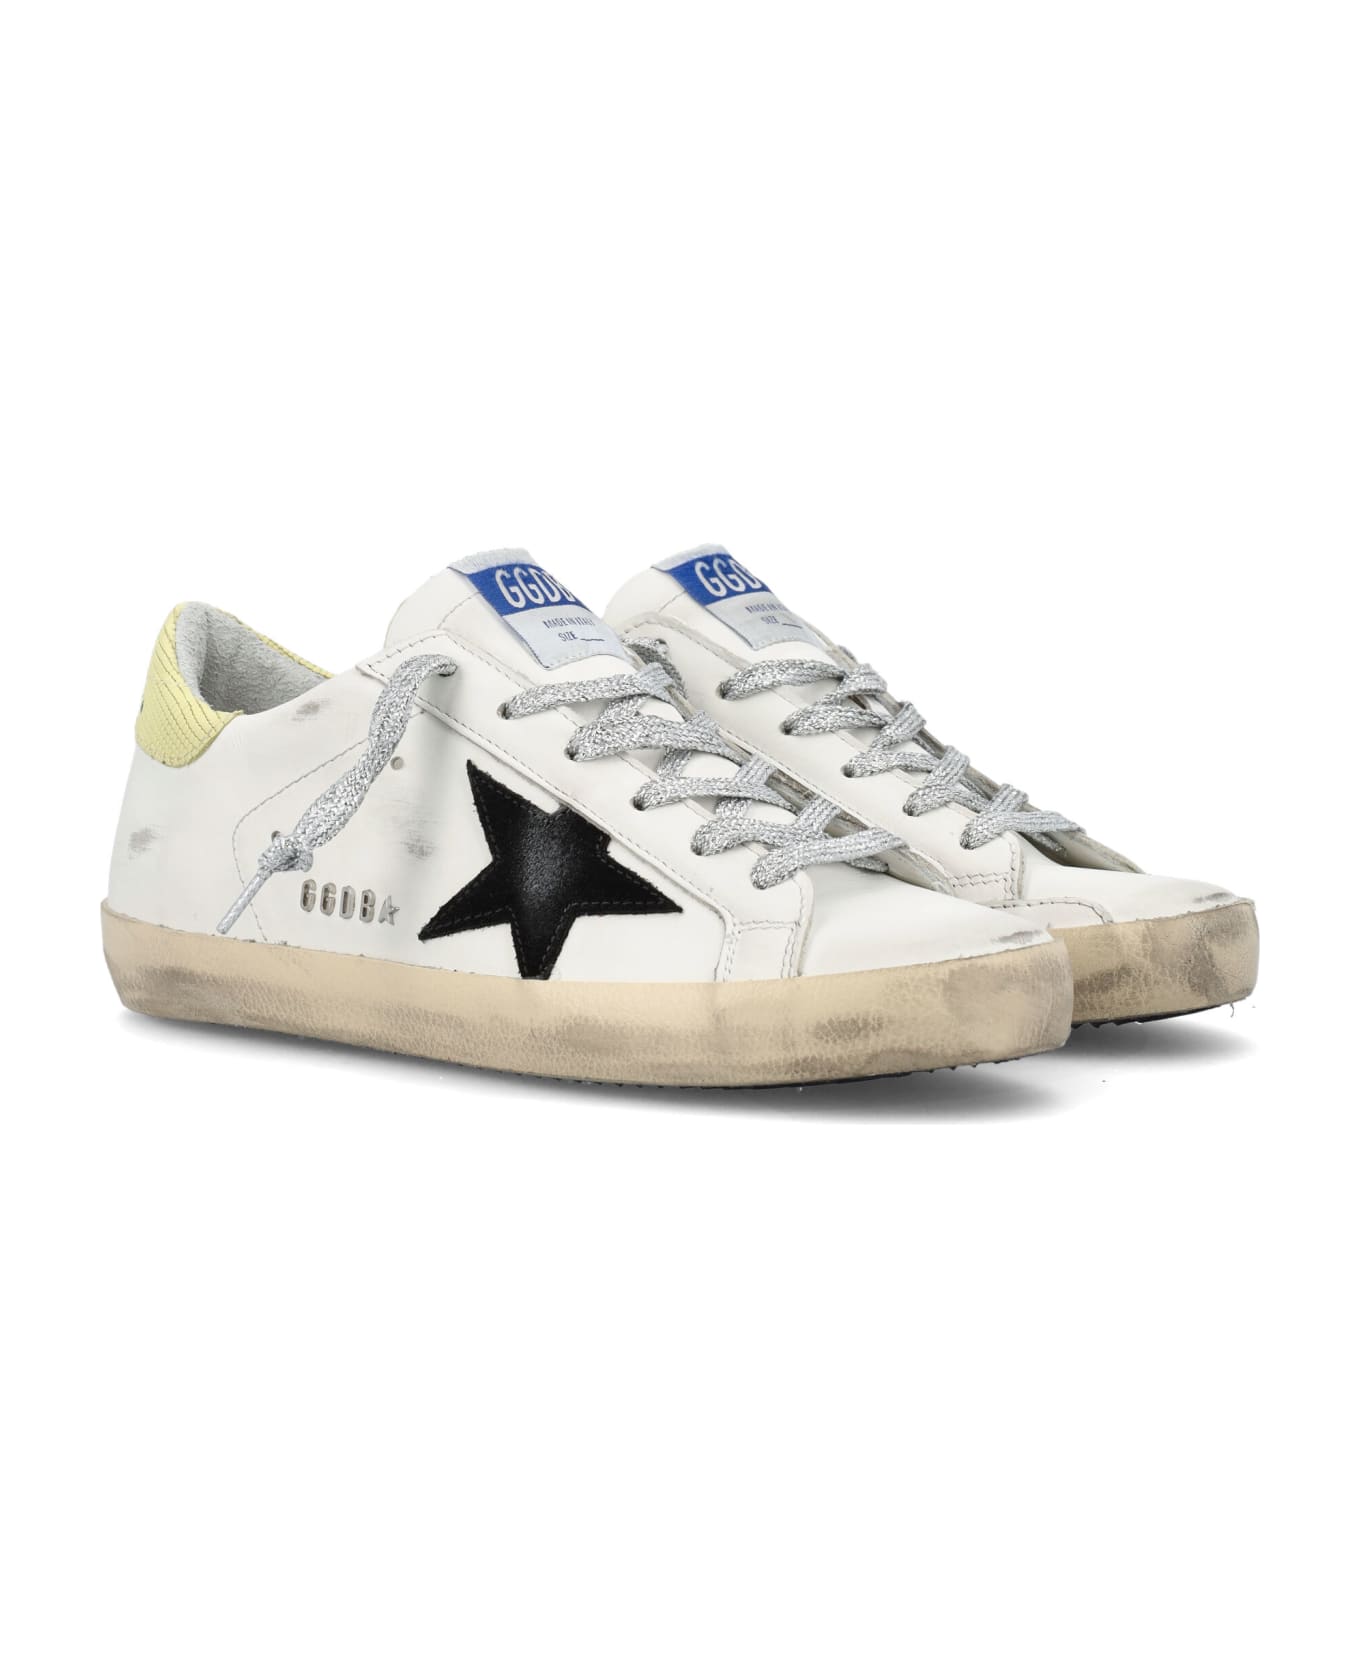 Golden Goose Super-star Classic With Laminated Laces - WHITE/BLACK/LIGHT GREEN